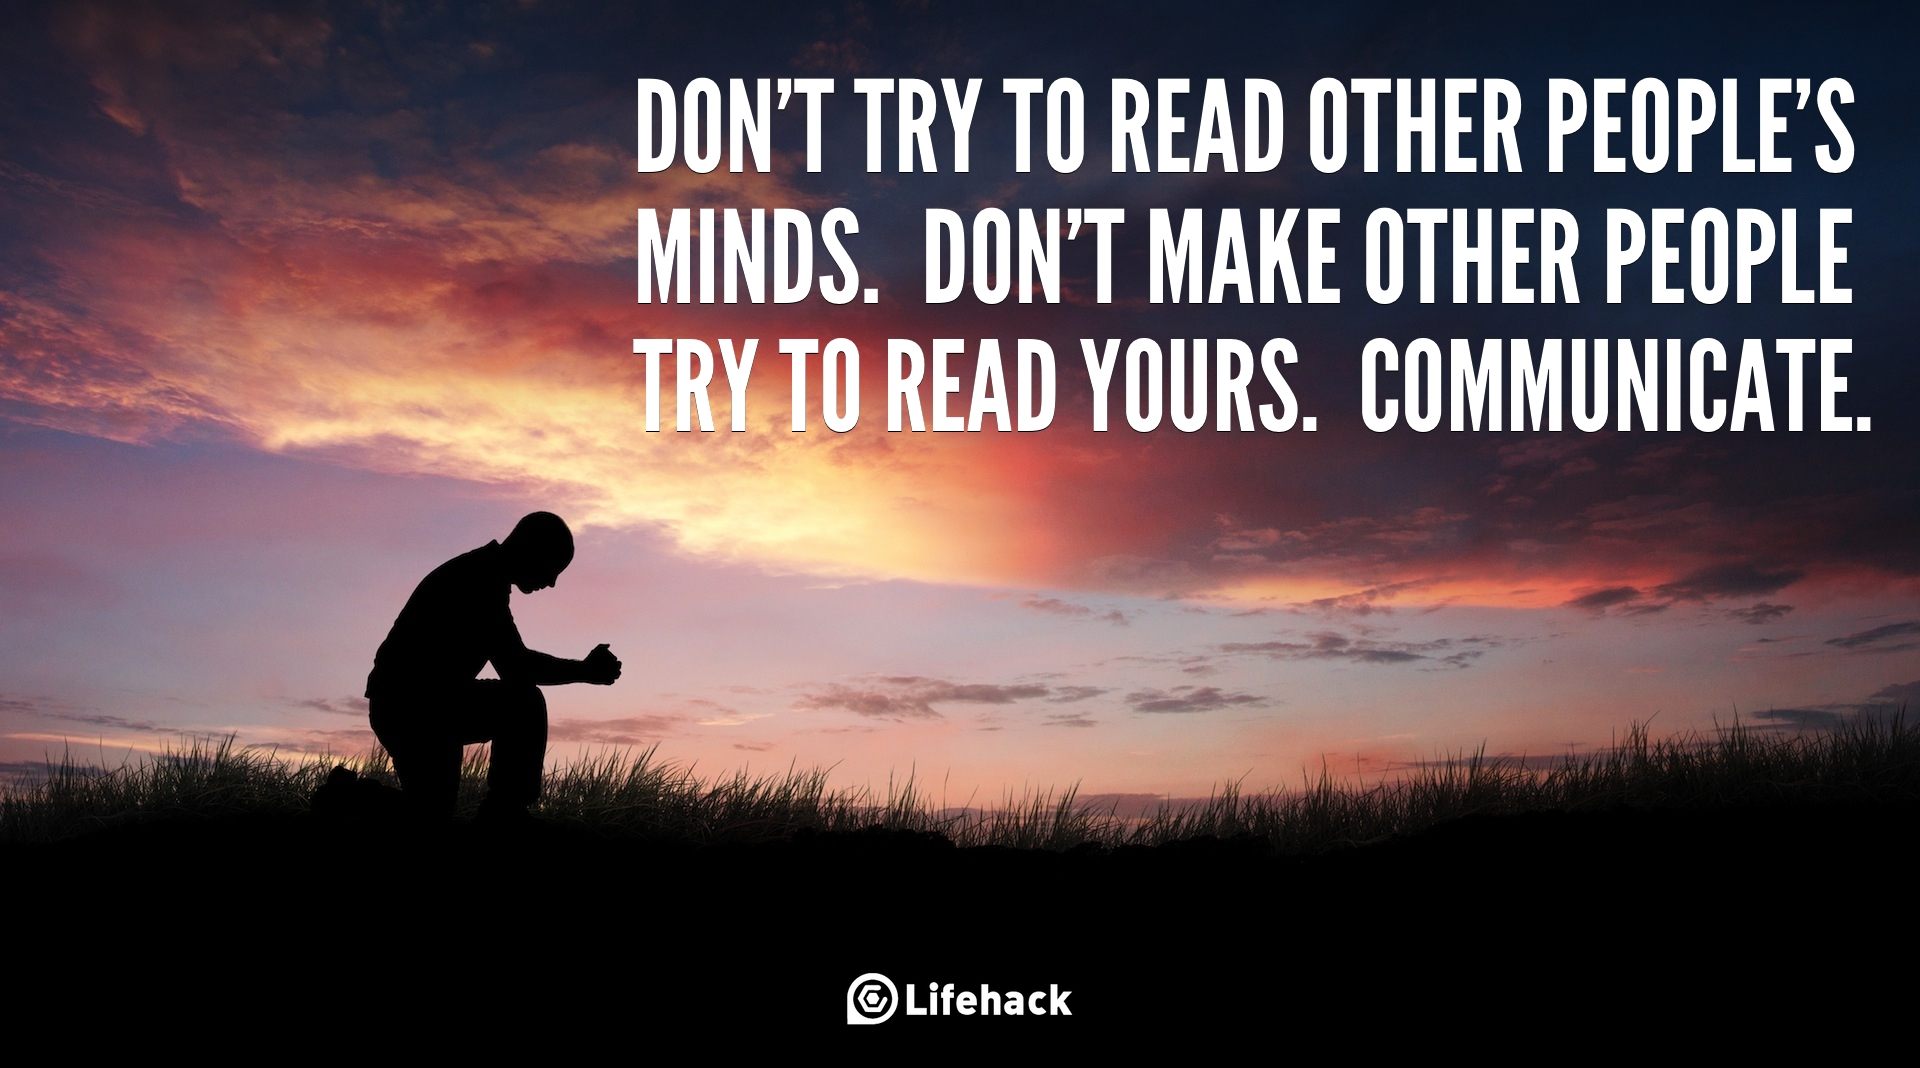 30sec Tip: Don’t Try to Read Other People’s Minds